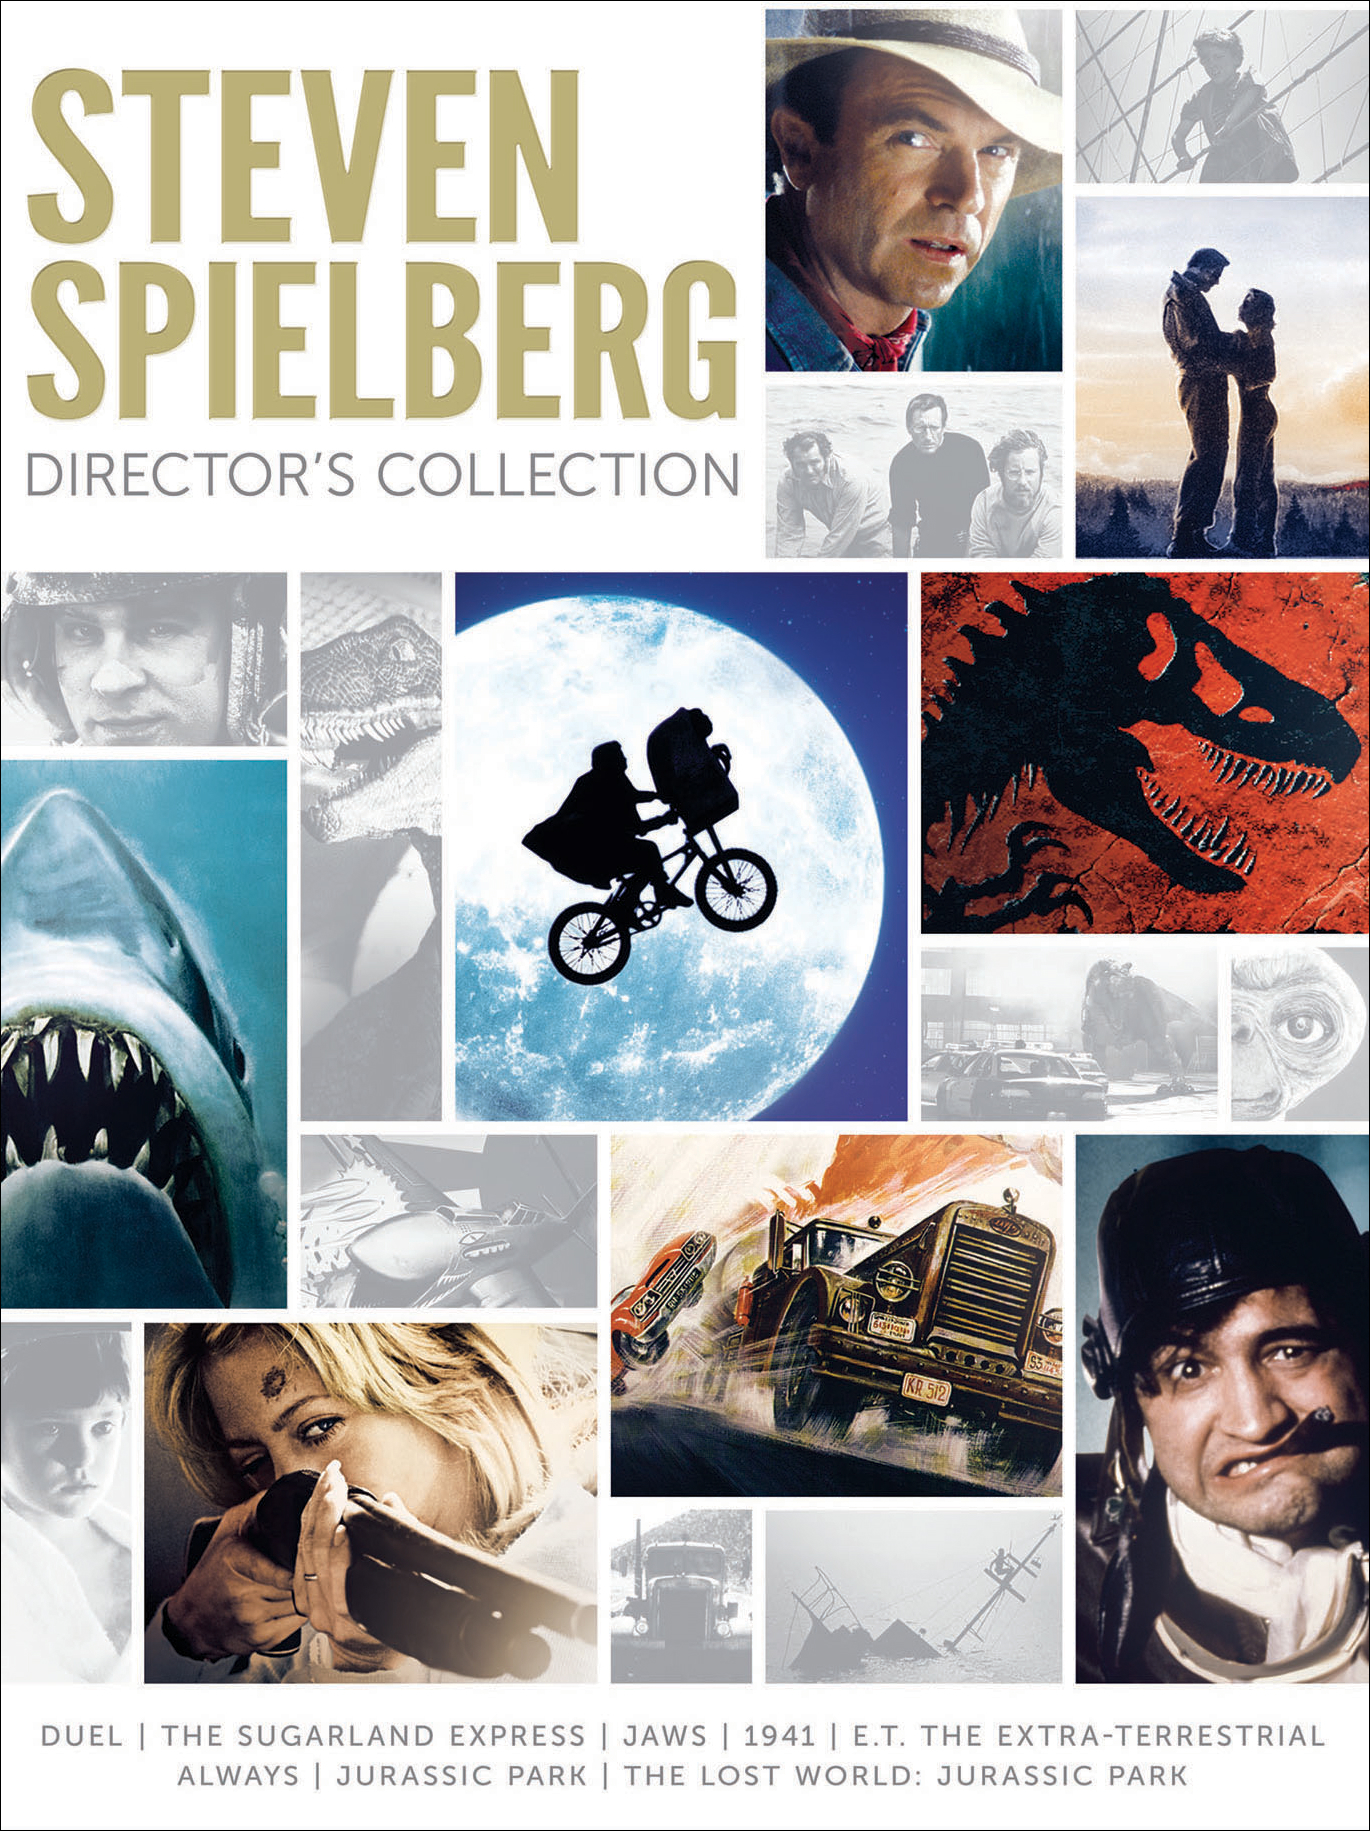 Steven Spielberg Director's Collection (Box Set) - DVD [ ] - Modern Classic Movies on DVD